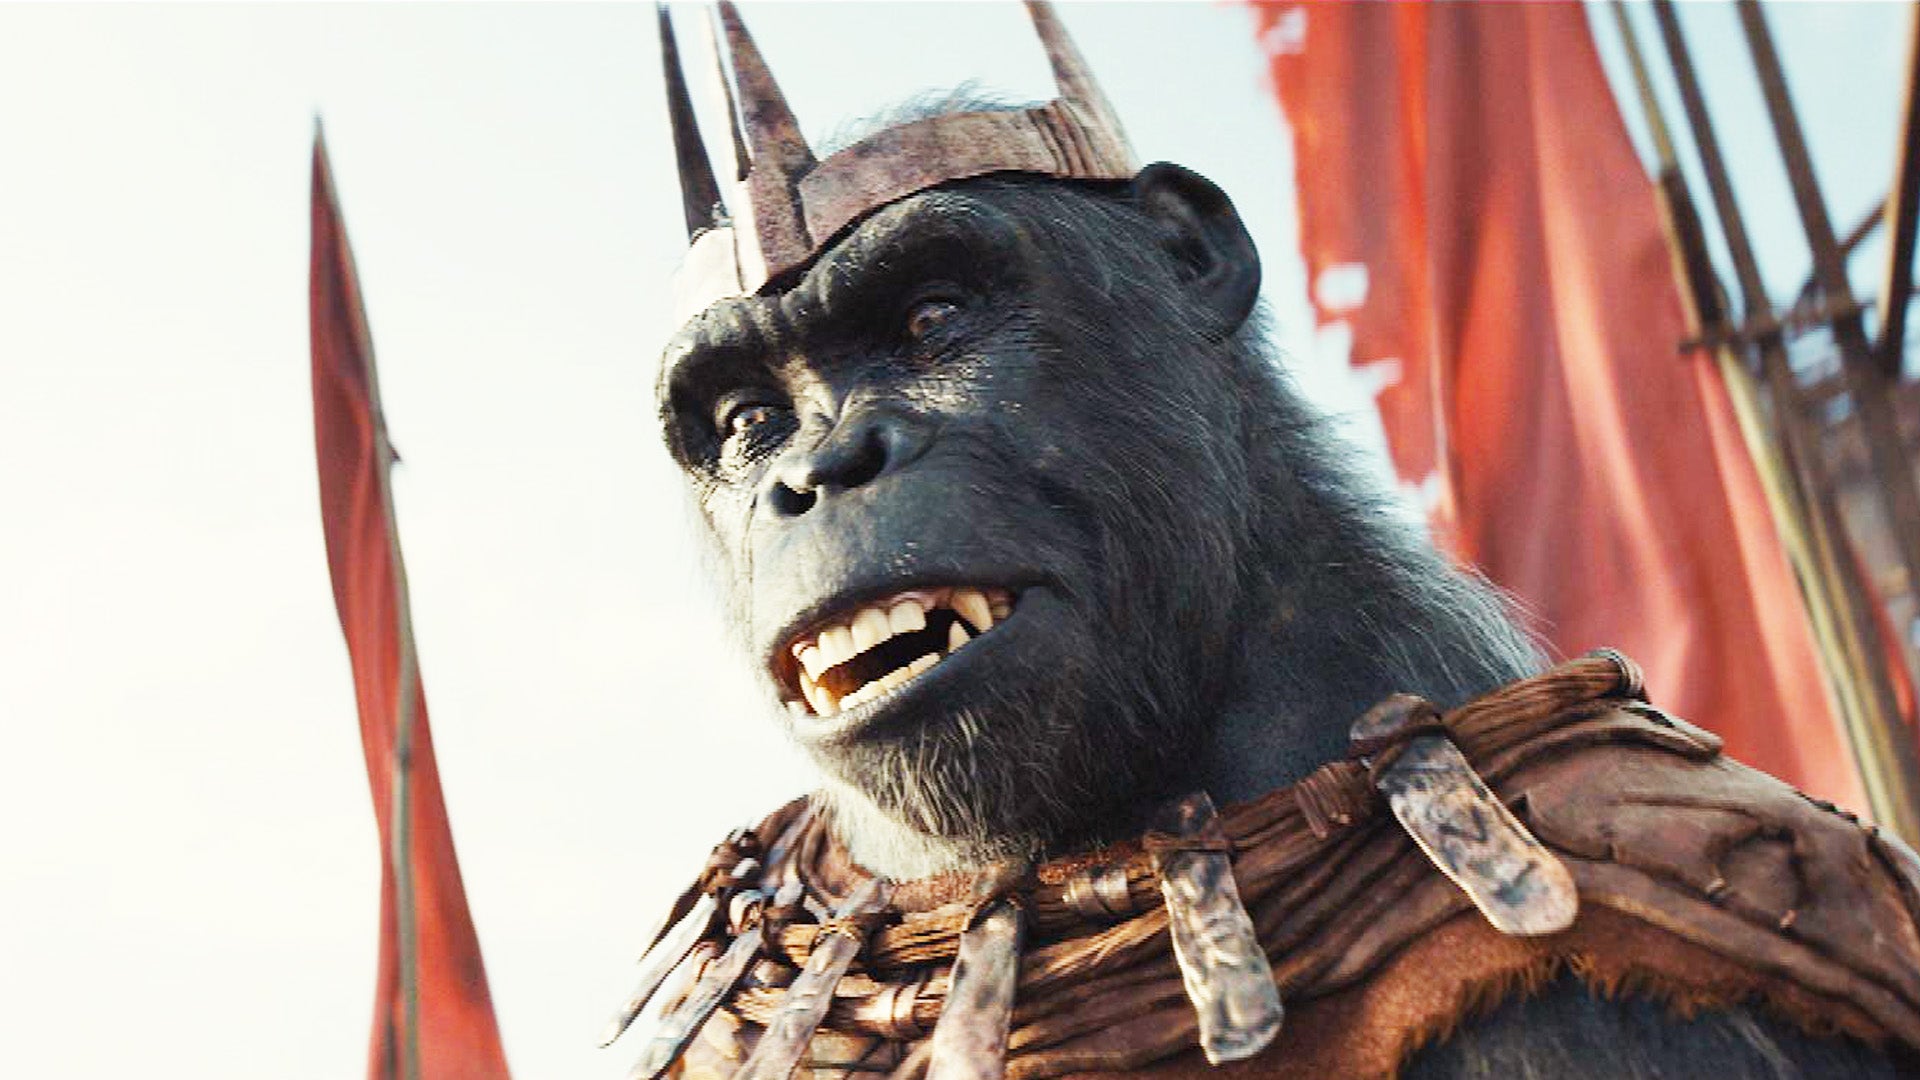 ‘Kingdom of the Planet of the Apes’ Trailer No. 1